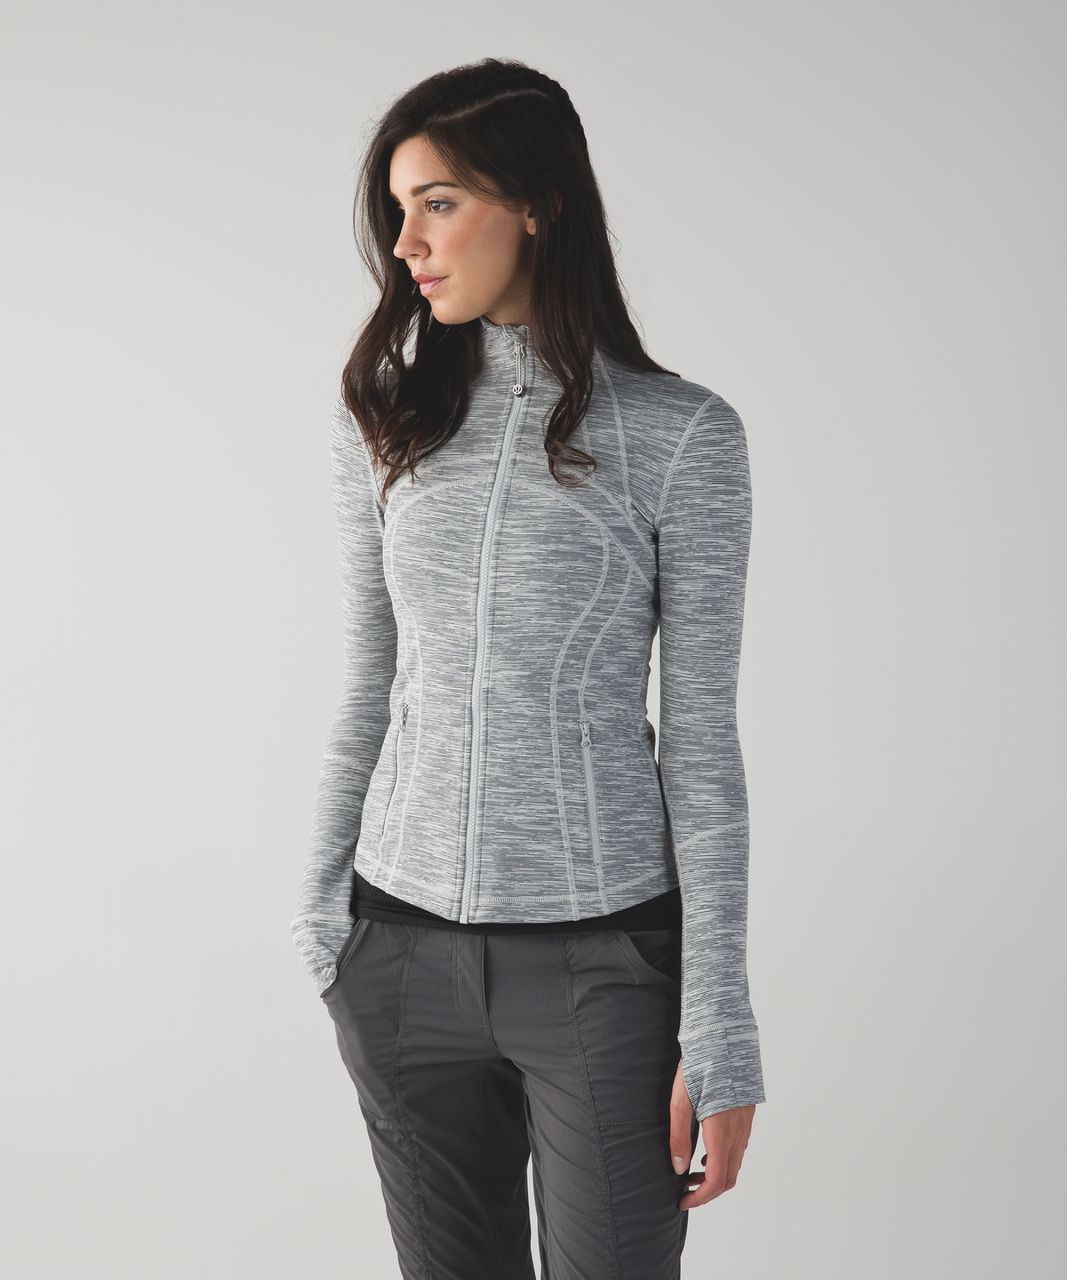 Lululemon Define Jacket - Wee Are From 